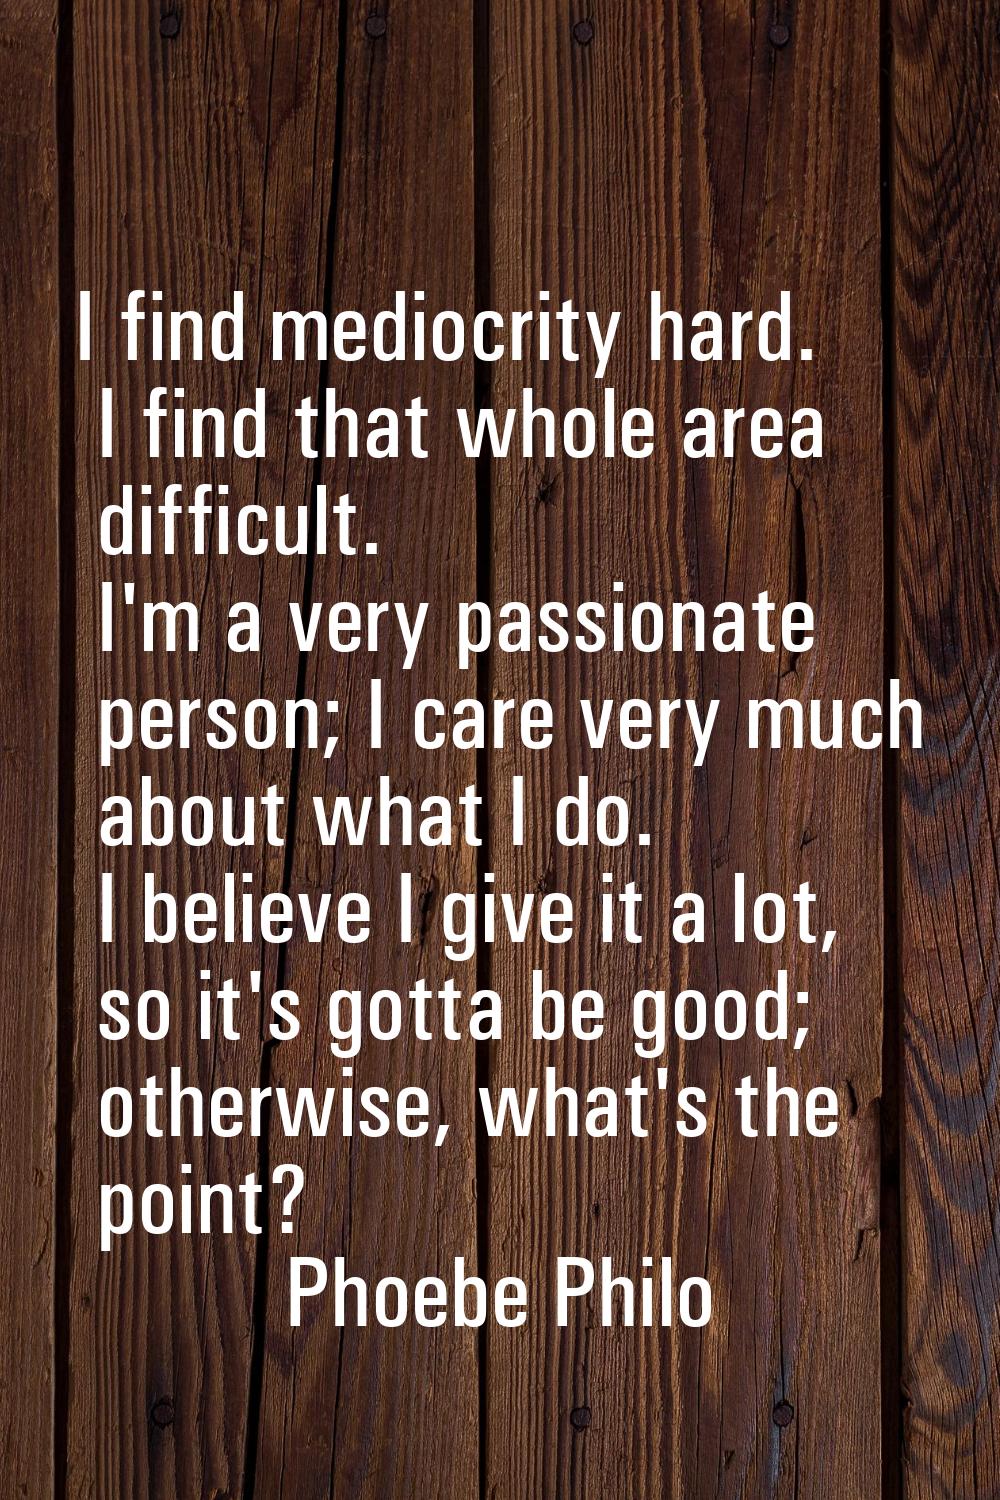 I find mediocrity hard. I find that whole area difficult. I'm a very passionate person; I care very